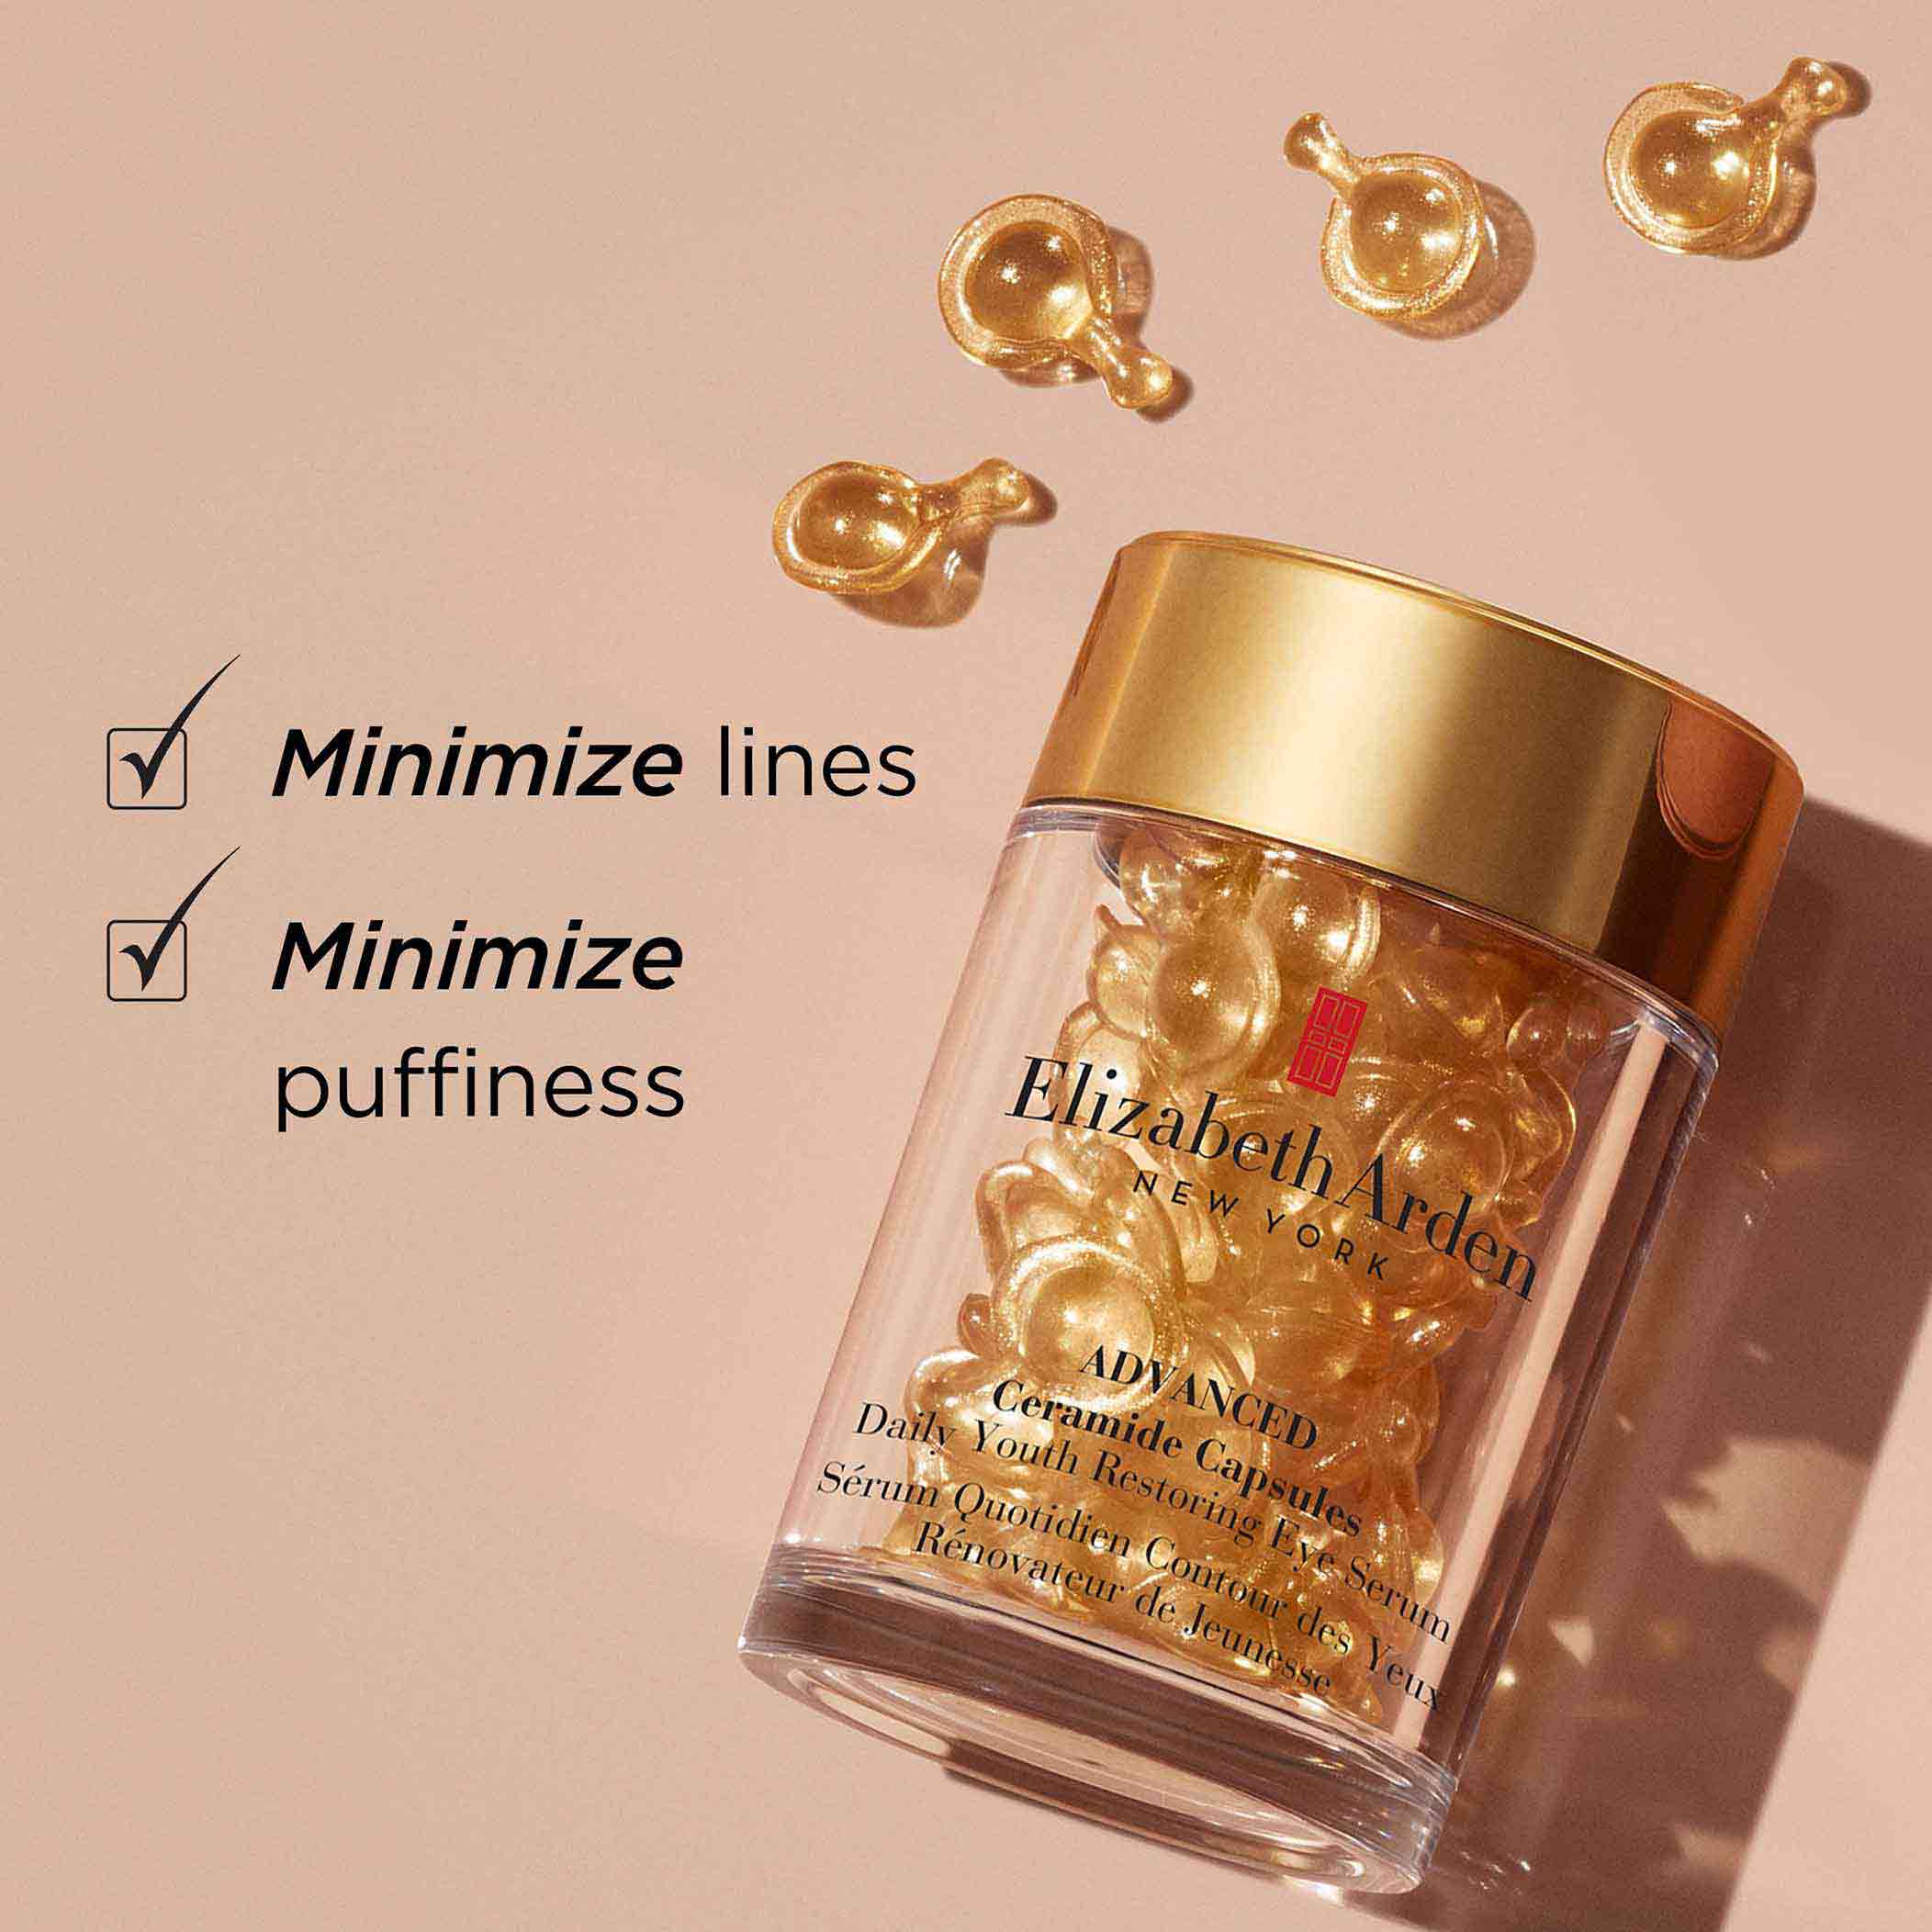 Minimize lines and puffiness